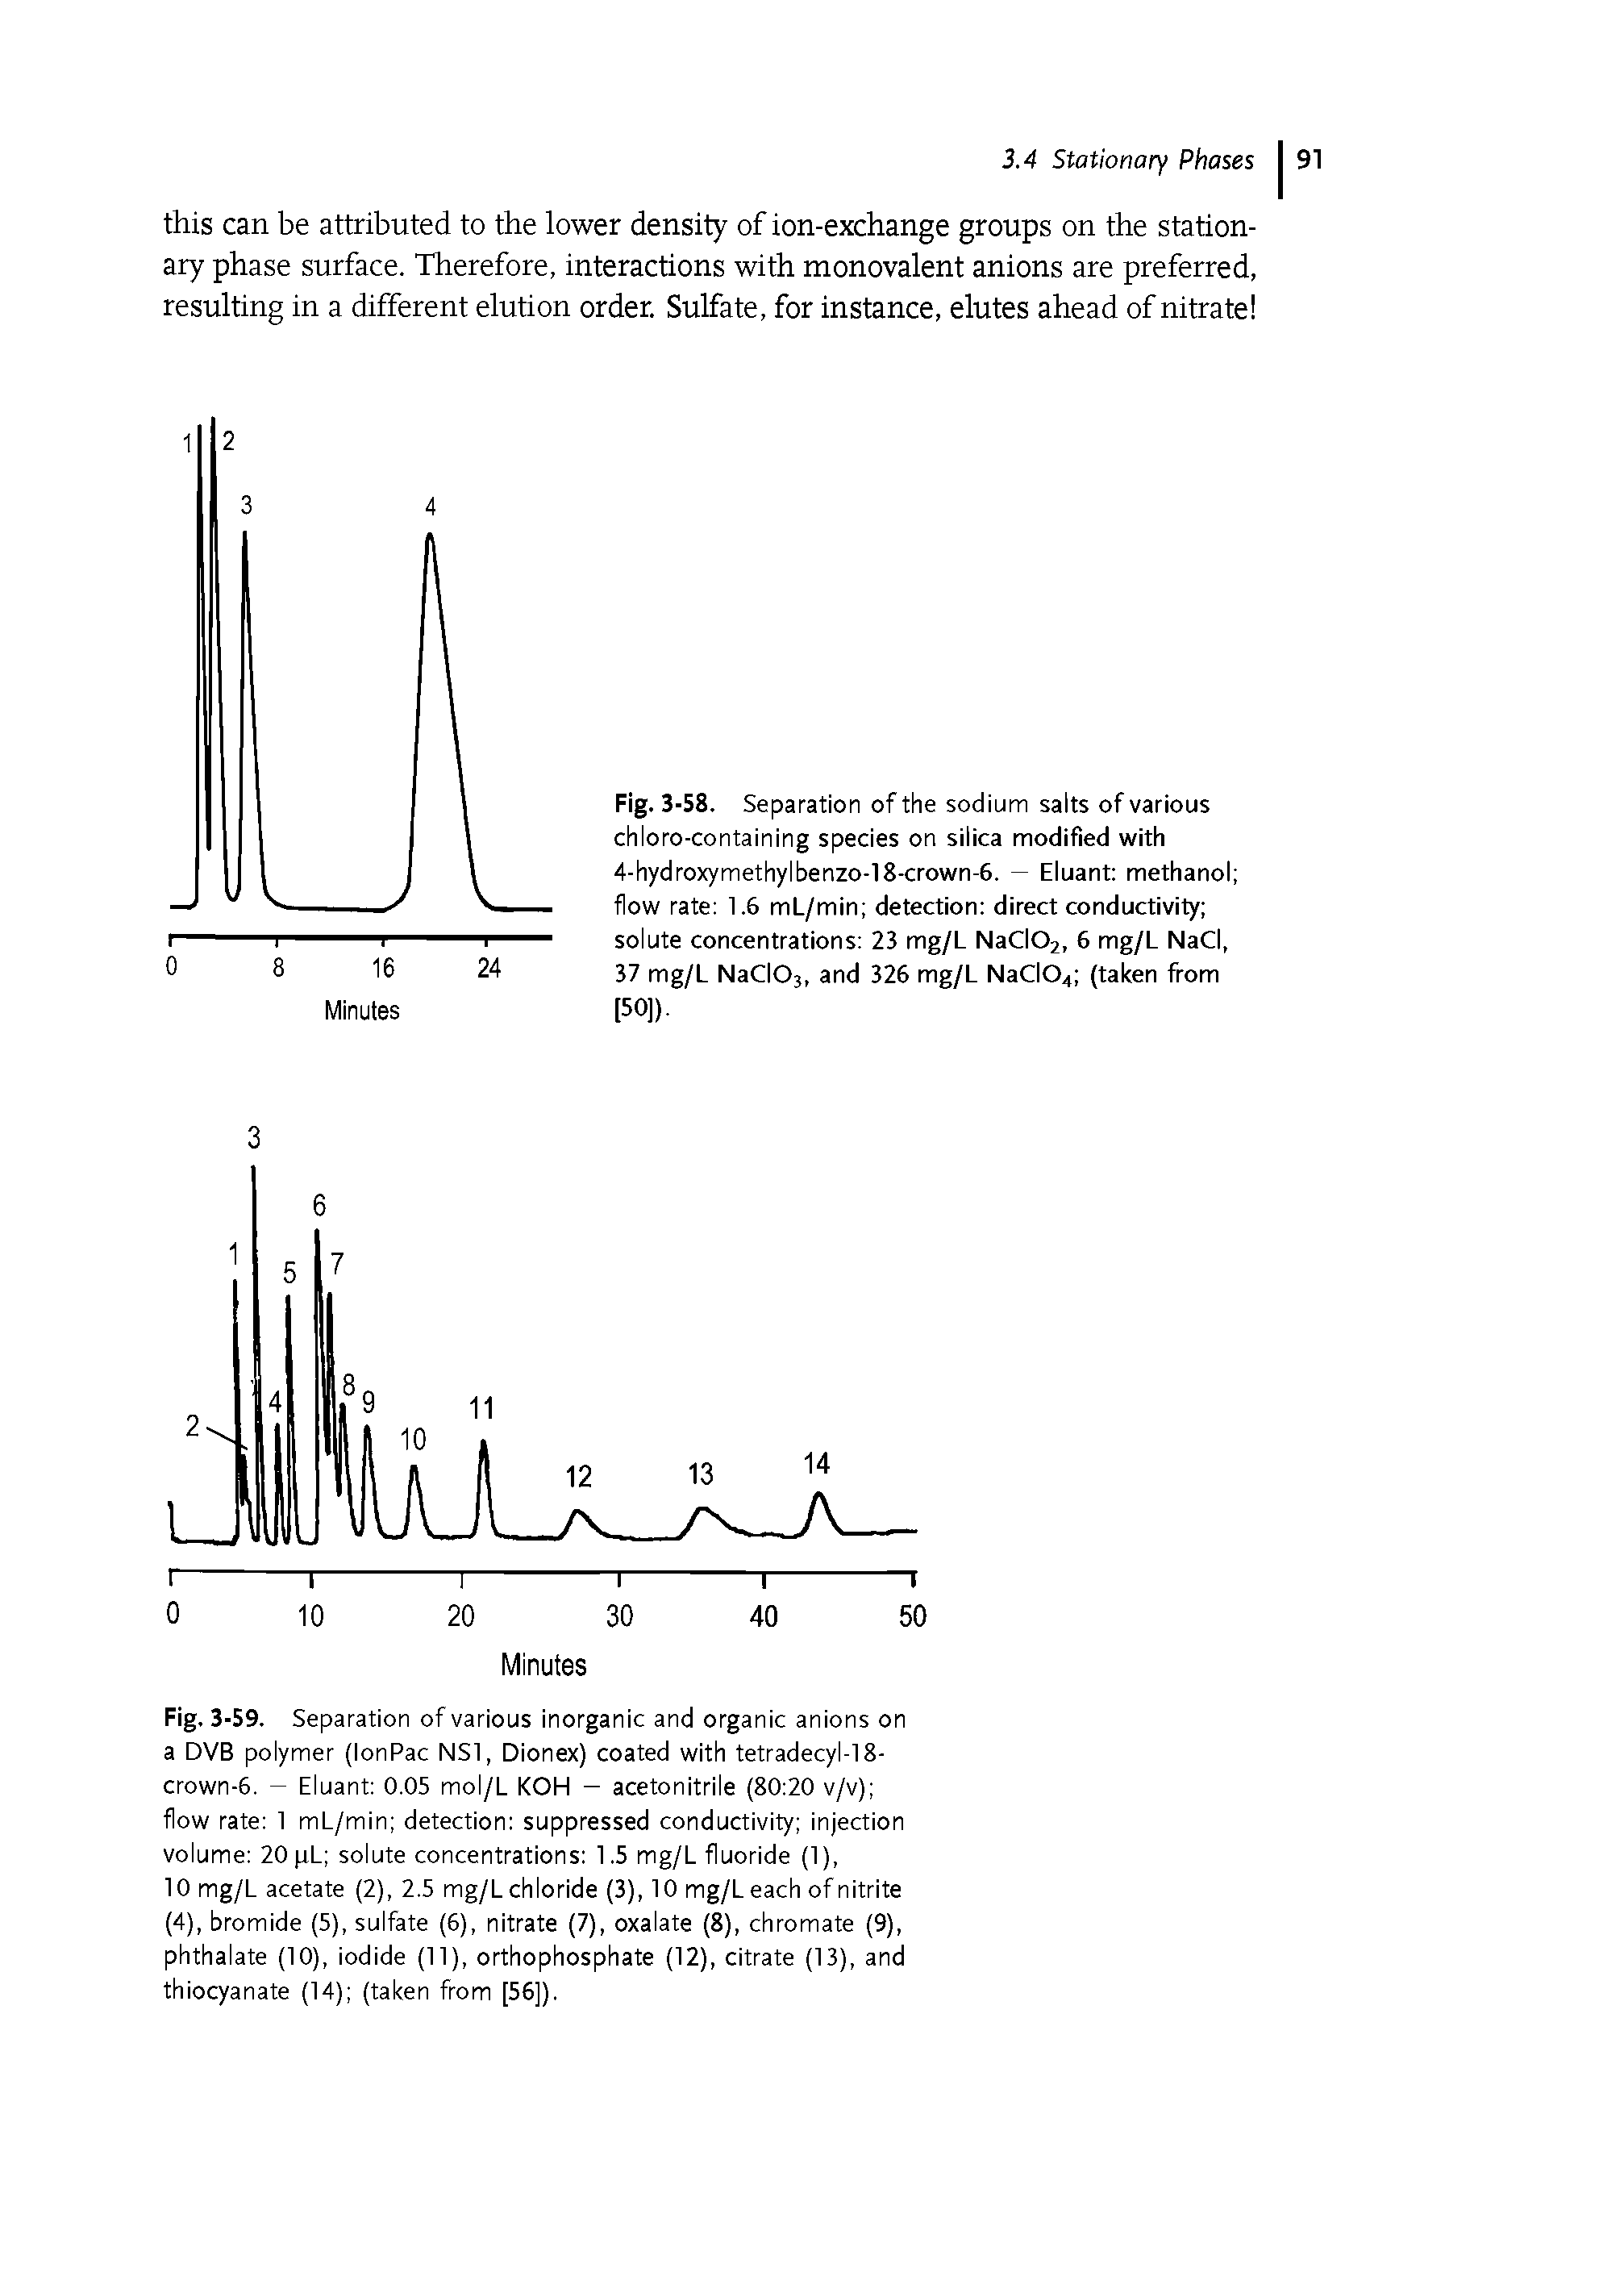 Fig. 3-58. Separation of the sodium saits of various chloro-containing species on siiica modified with 4-hydroxymethylbenzo-18-crown-6. — Eiuant methanoi flow rate 1.6 mL/min detection direct conductivity solute concentrations 23 mg/L NaCi02, 6 mg/L NaCi, 37 mg/L NaClOj, and 326 mg/L NaCi04 (taken from [50]).